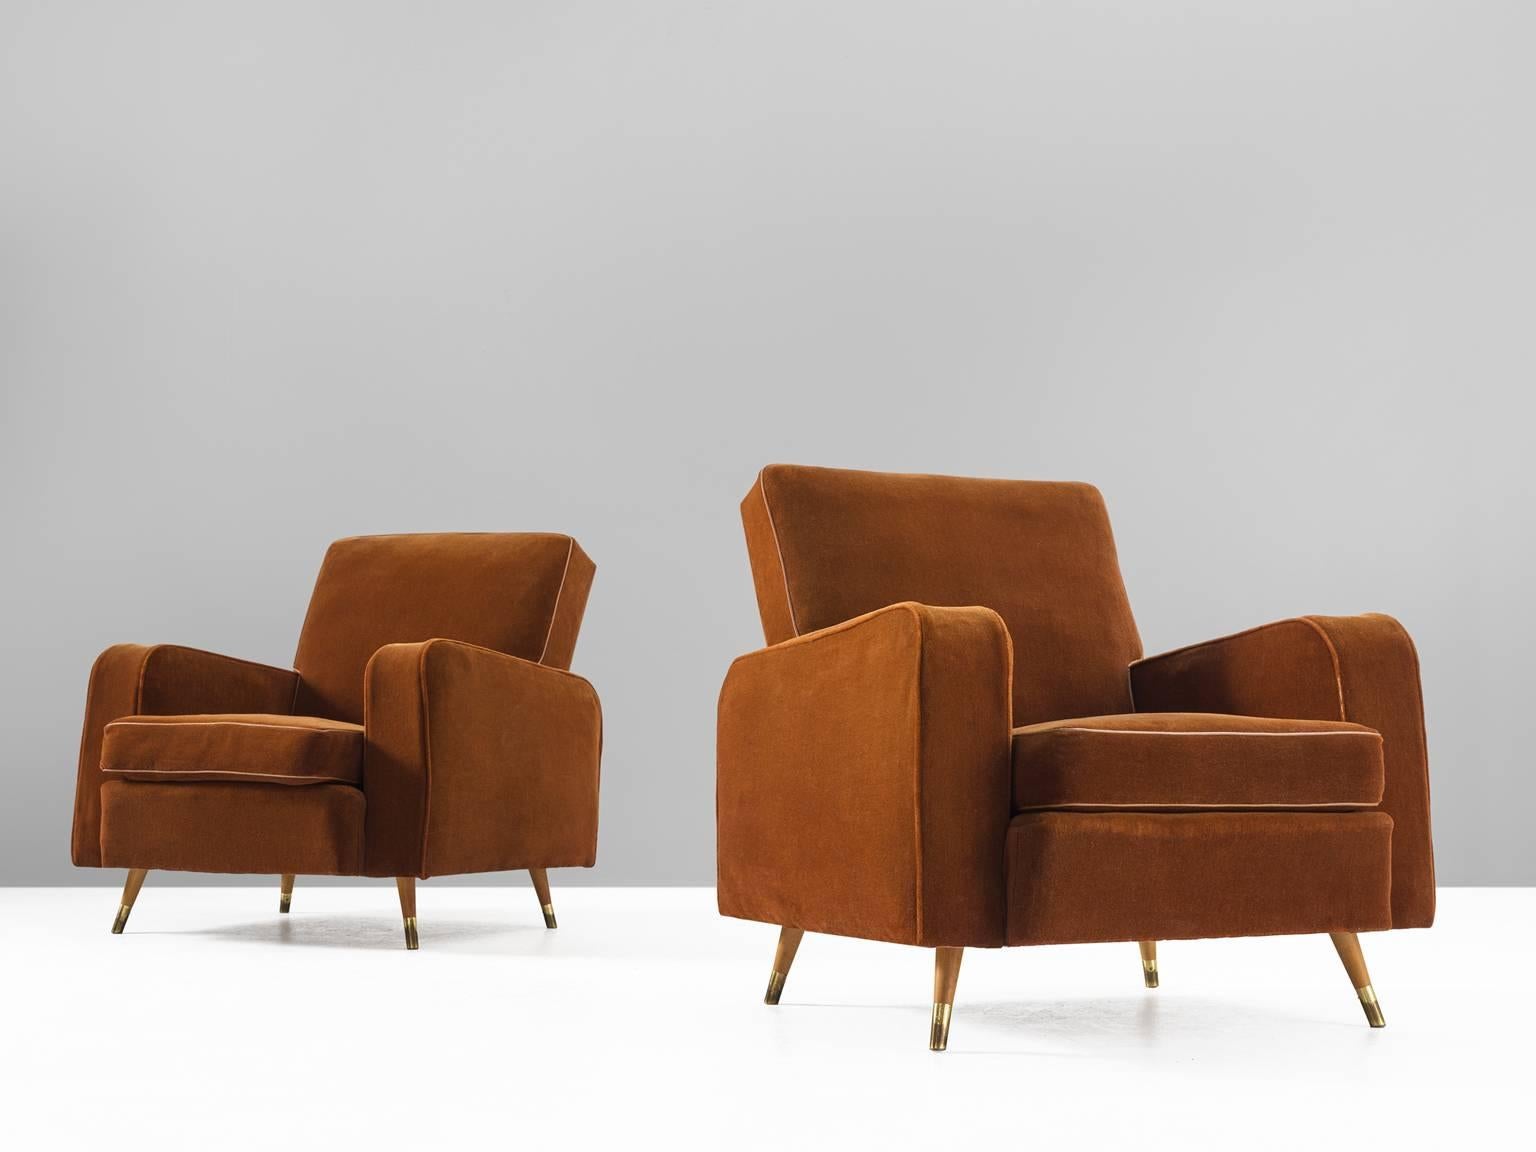 Armchairs, velvet, oak and brass, Italy, 1950s.

This pair of grand comfortable armchairs are strong and playful at the same time. The back, which is slightly tilted towards the back gives perfect support for the back. The color of these two